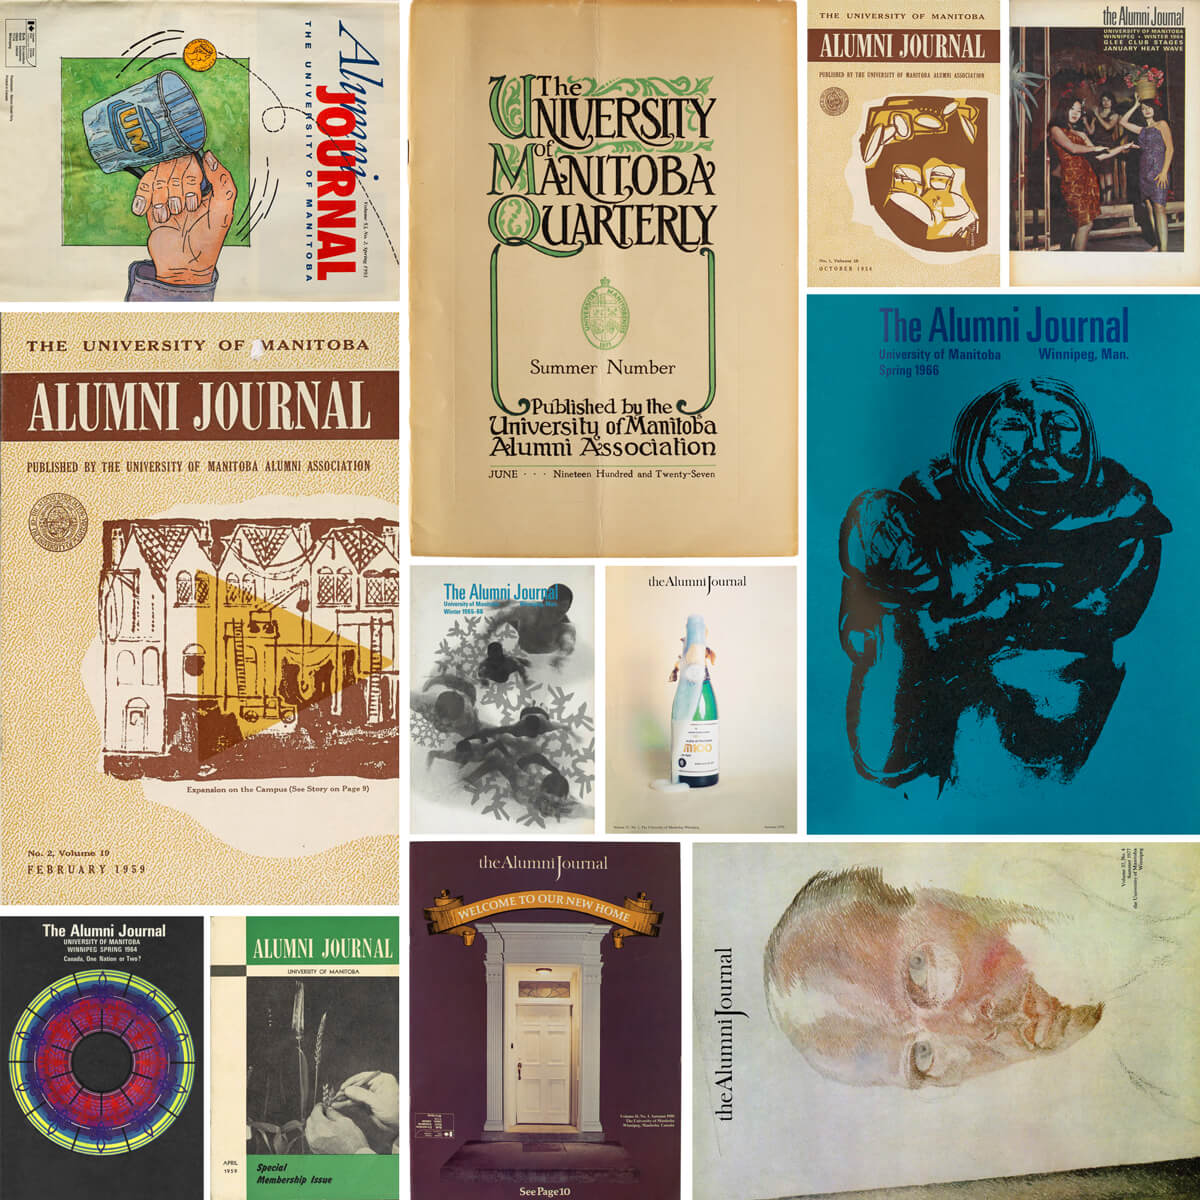 A scrapbook-style collection of snippets from the alumni journal.